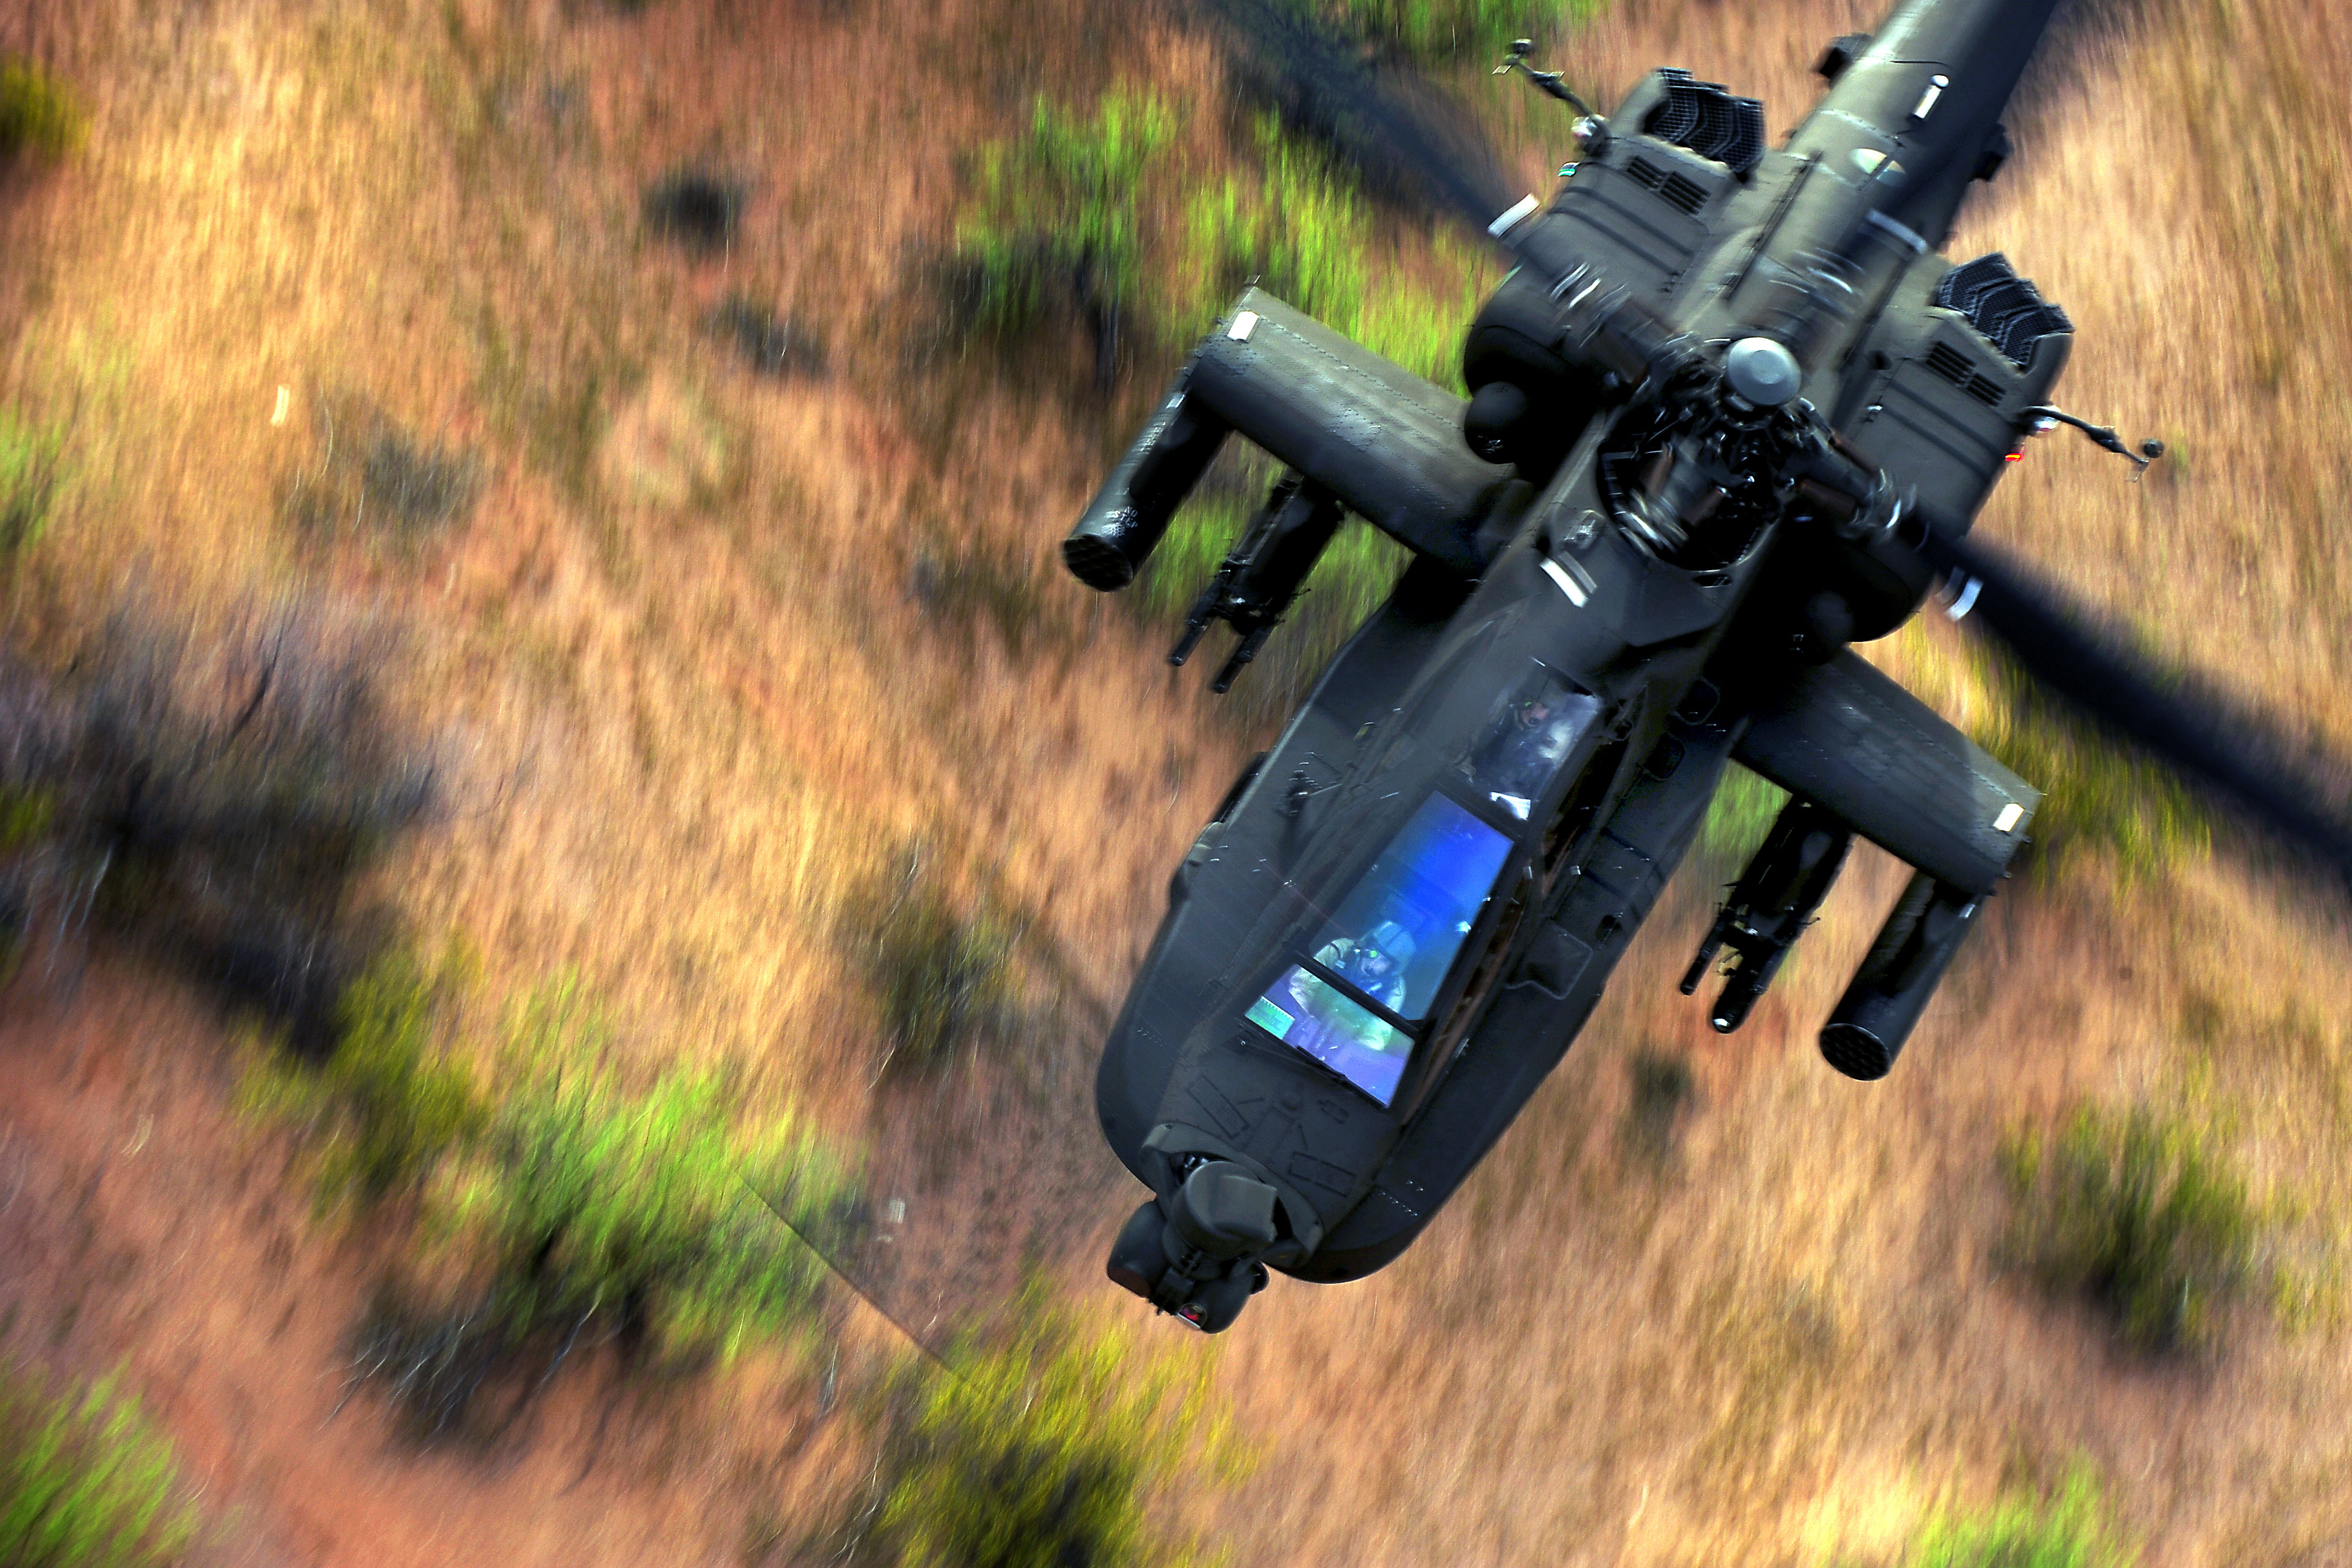 military, boeing ah 64 apache, military helicopters